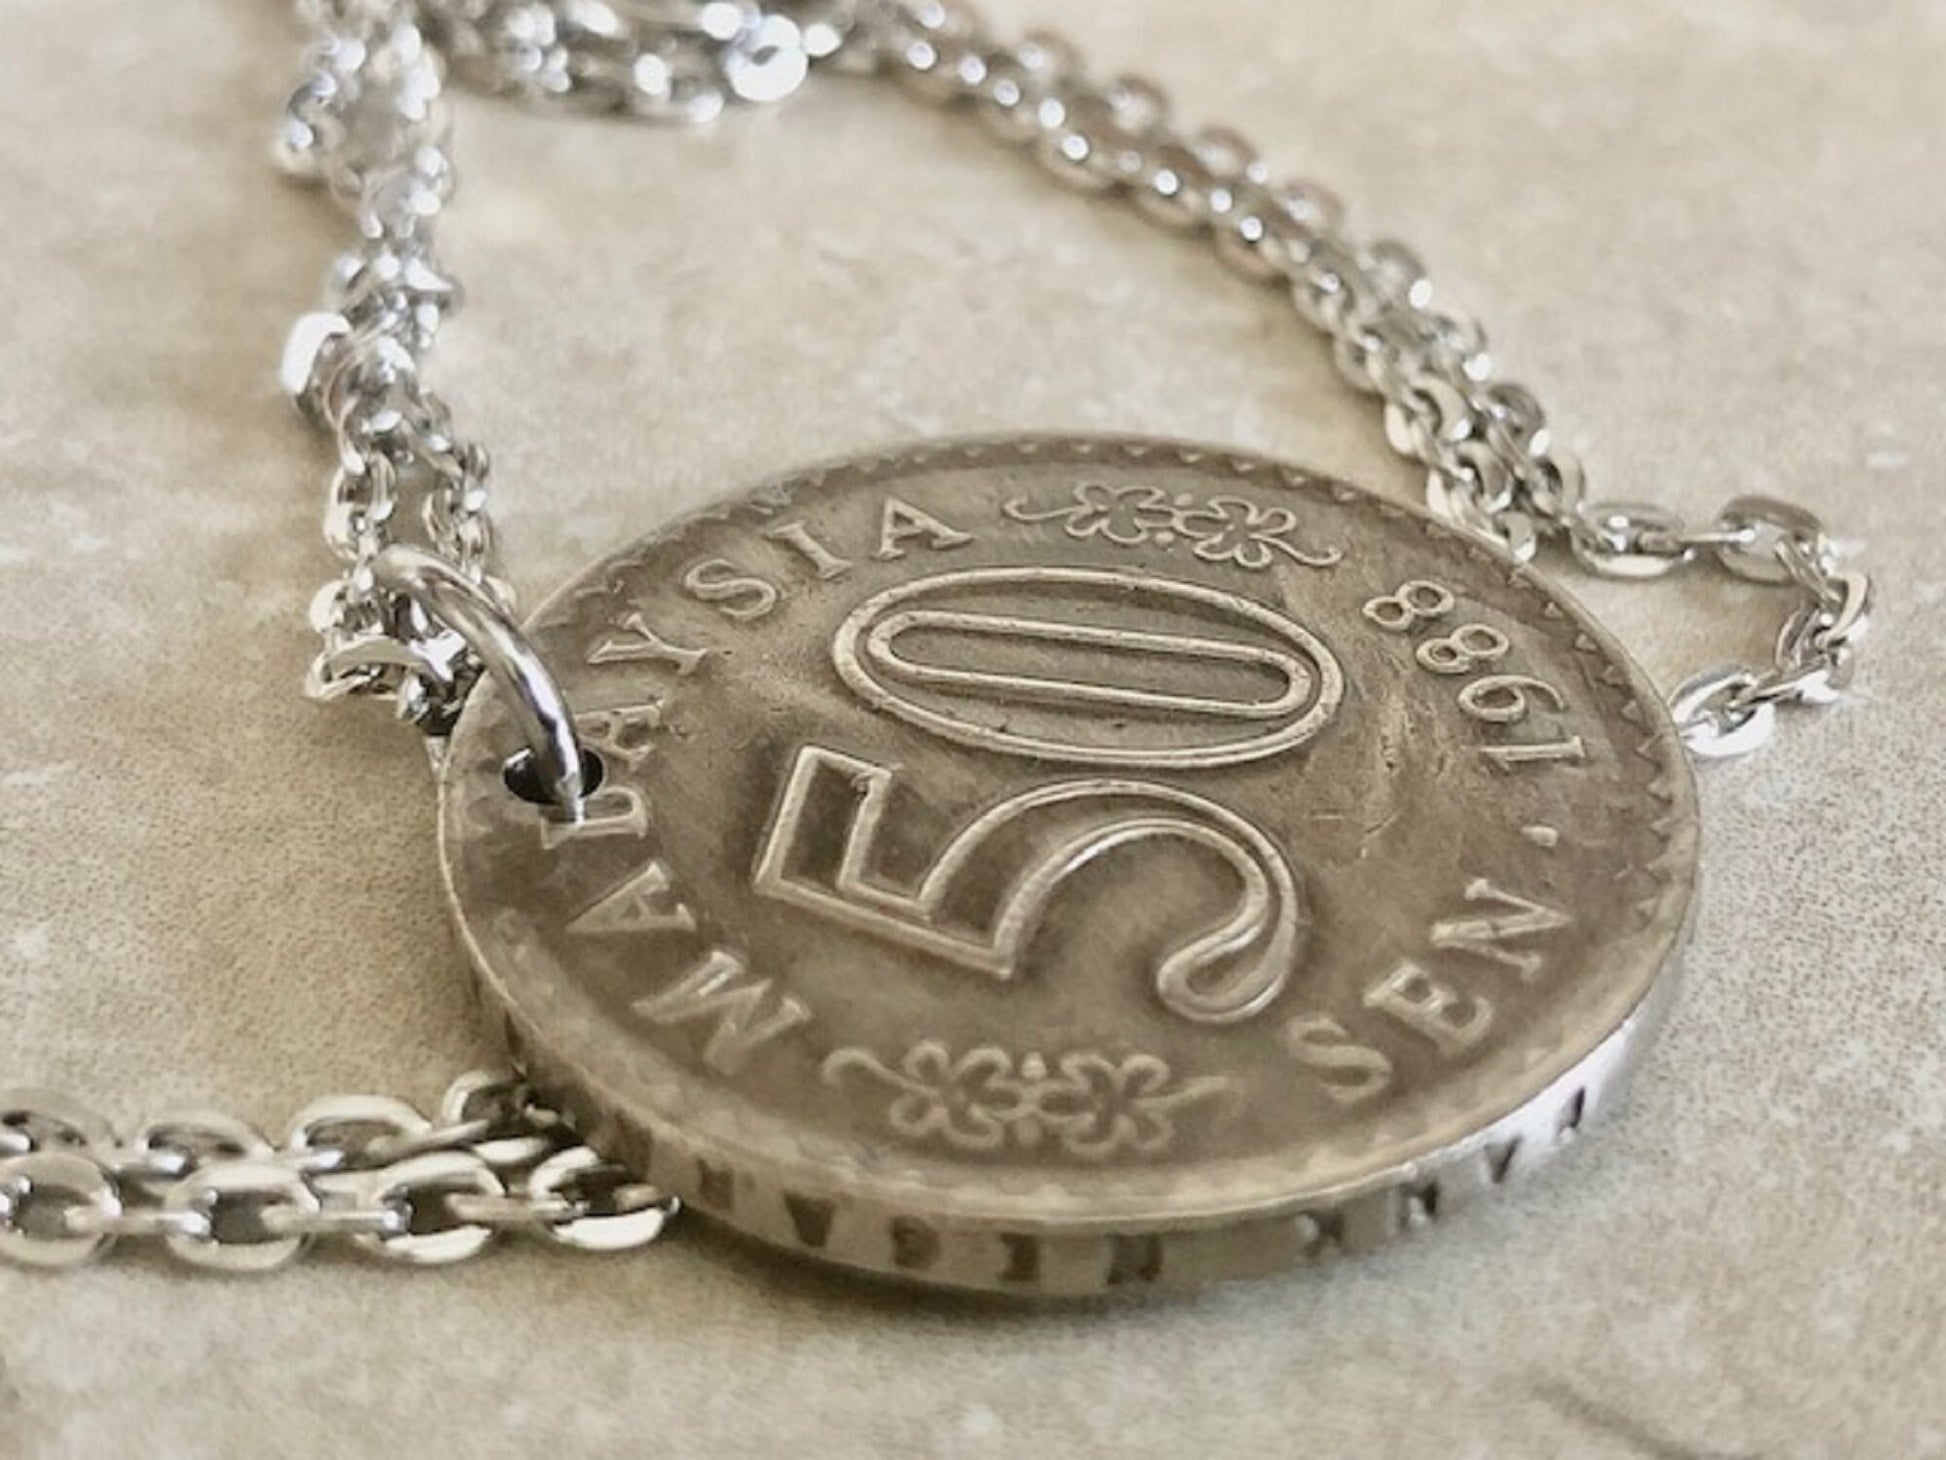 Malaysia Coin Fifty Sen Pendant Necklace Personal Necklace Old Vintage Handmade Jewelry Gift Friend Charm For Him Her World Coin Collector